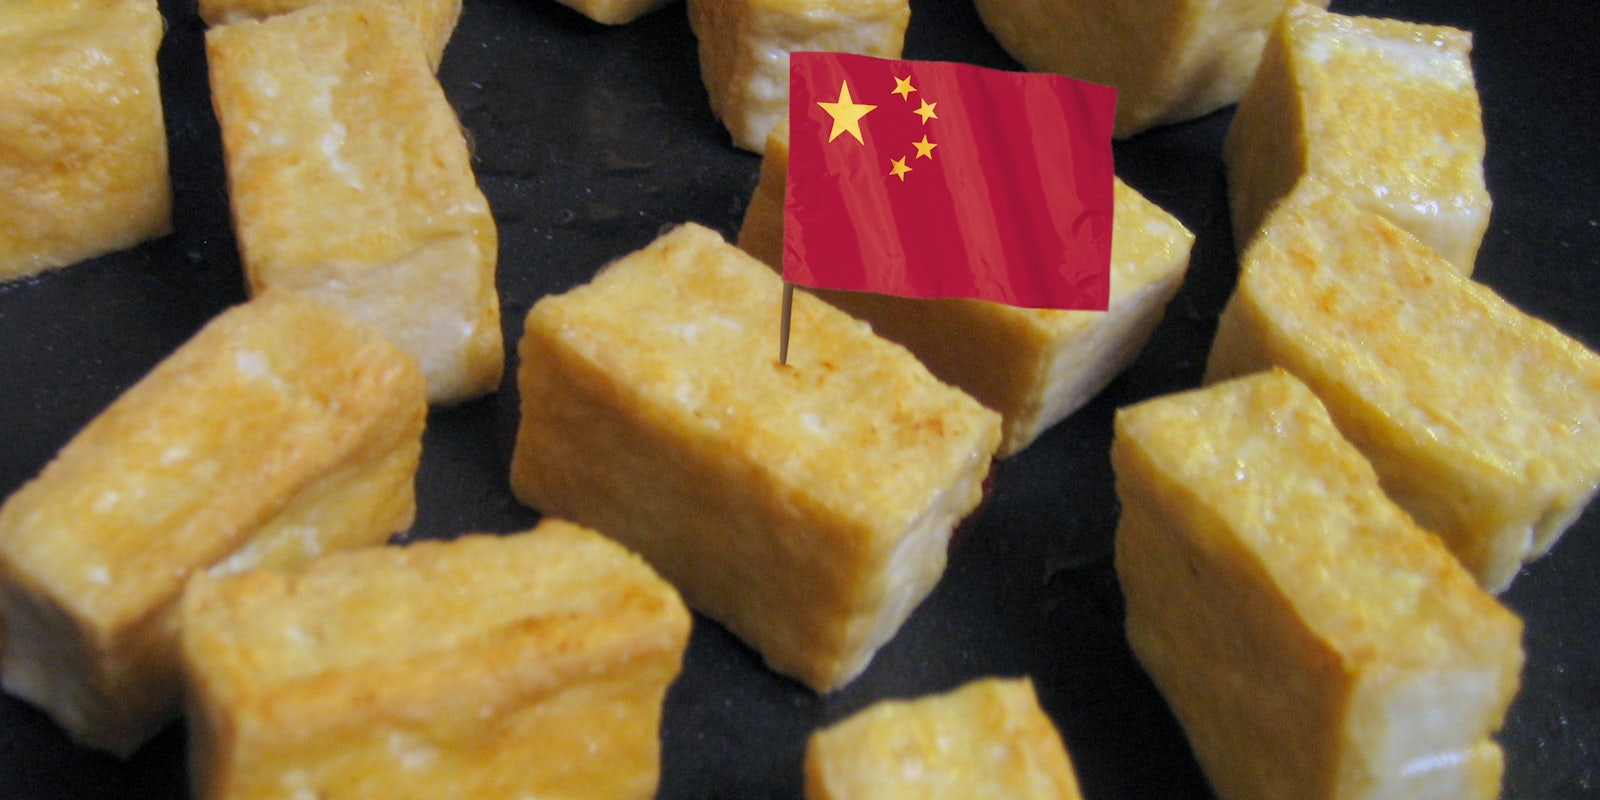 Tofu blocks with a Chinese flag on top